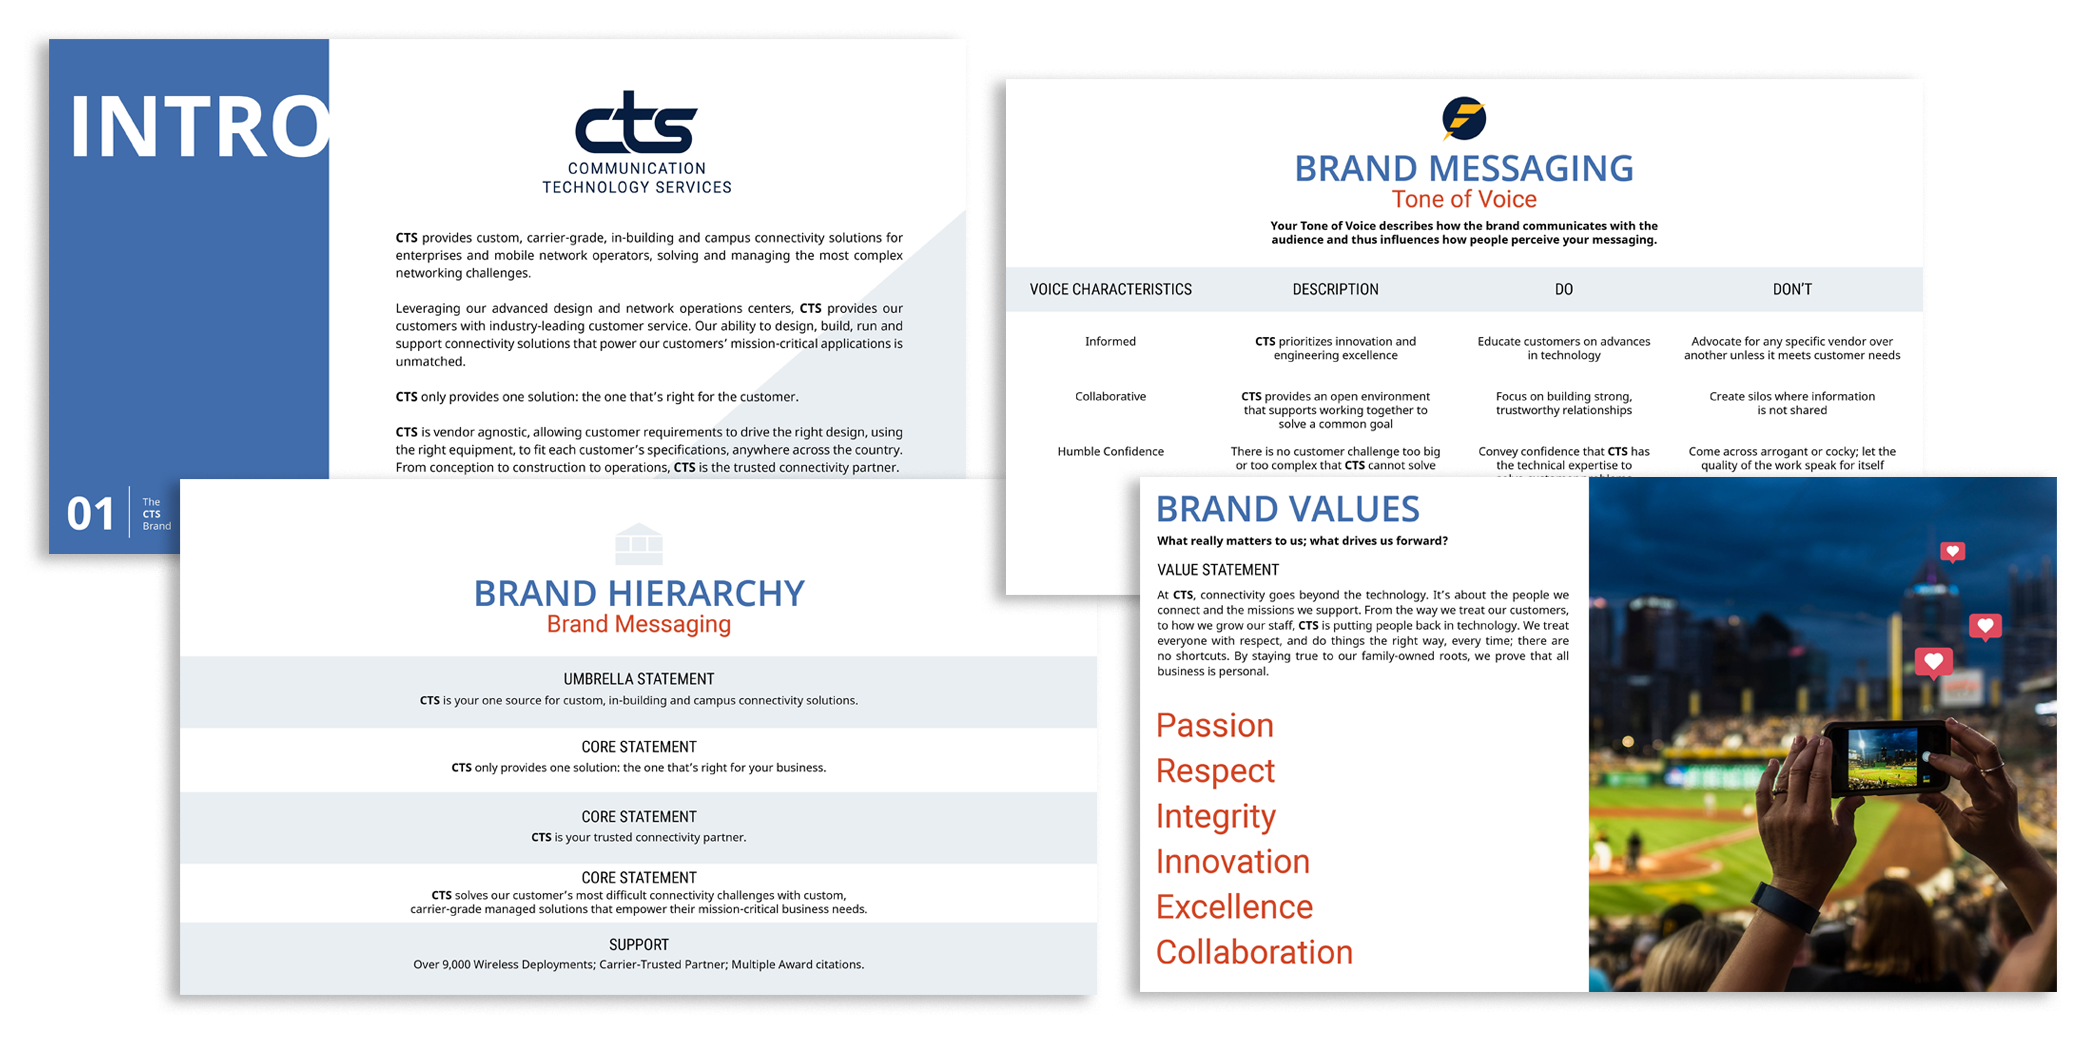 picture of presentation of CTS' brand messaging